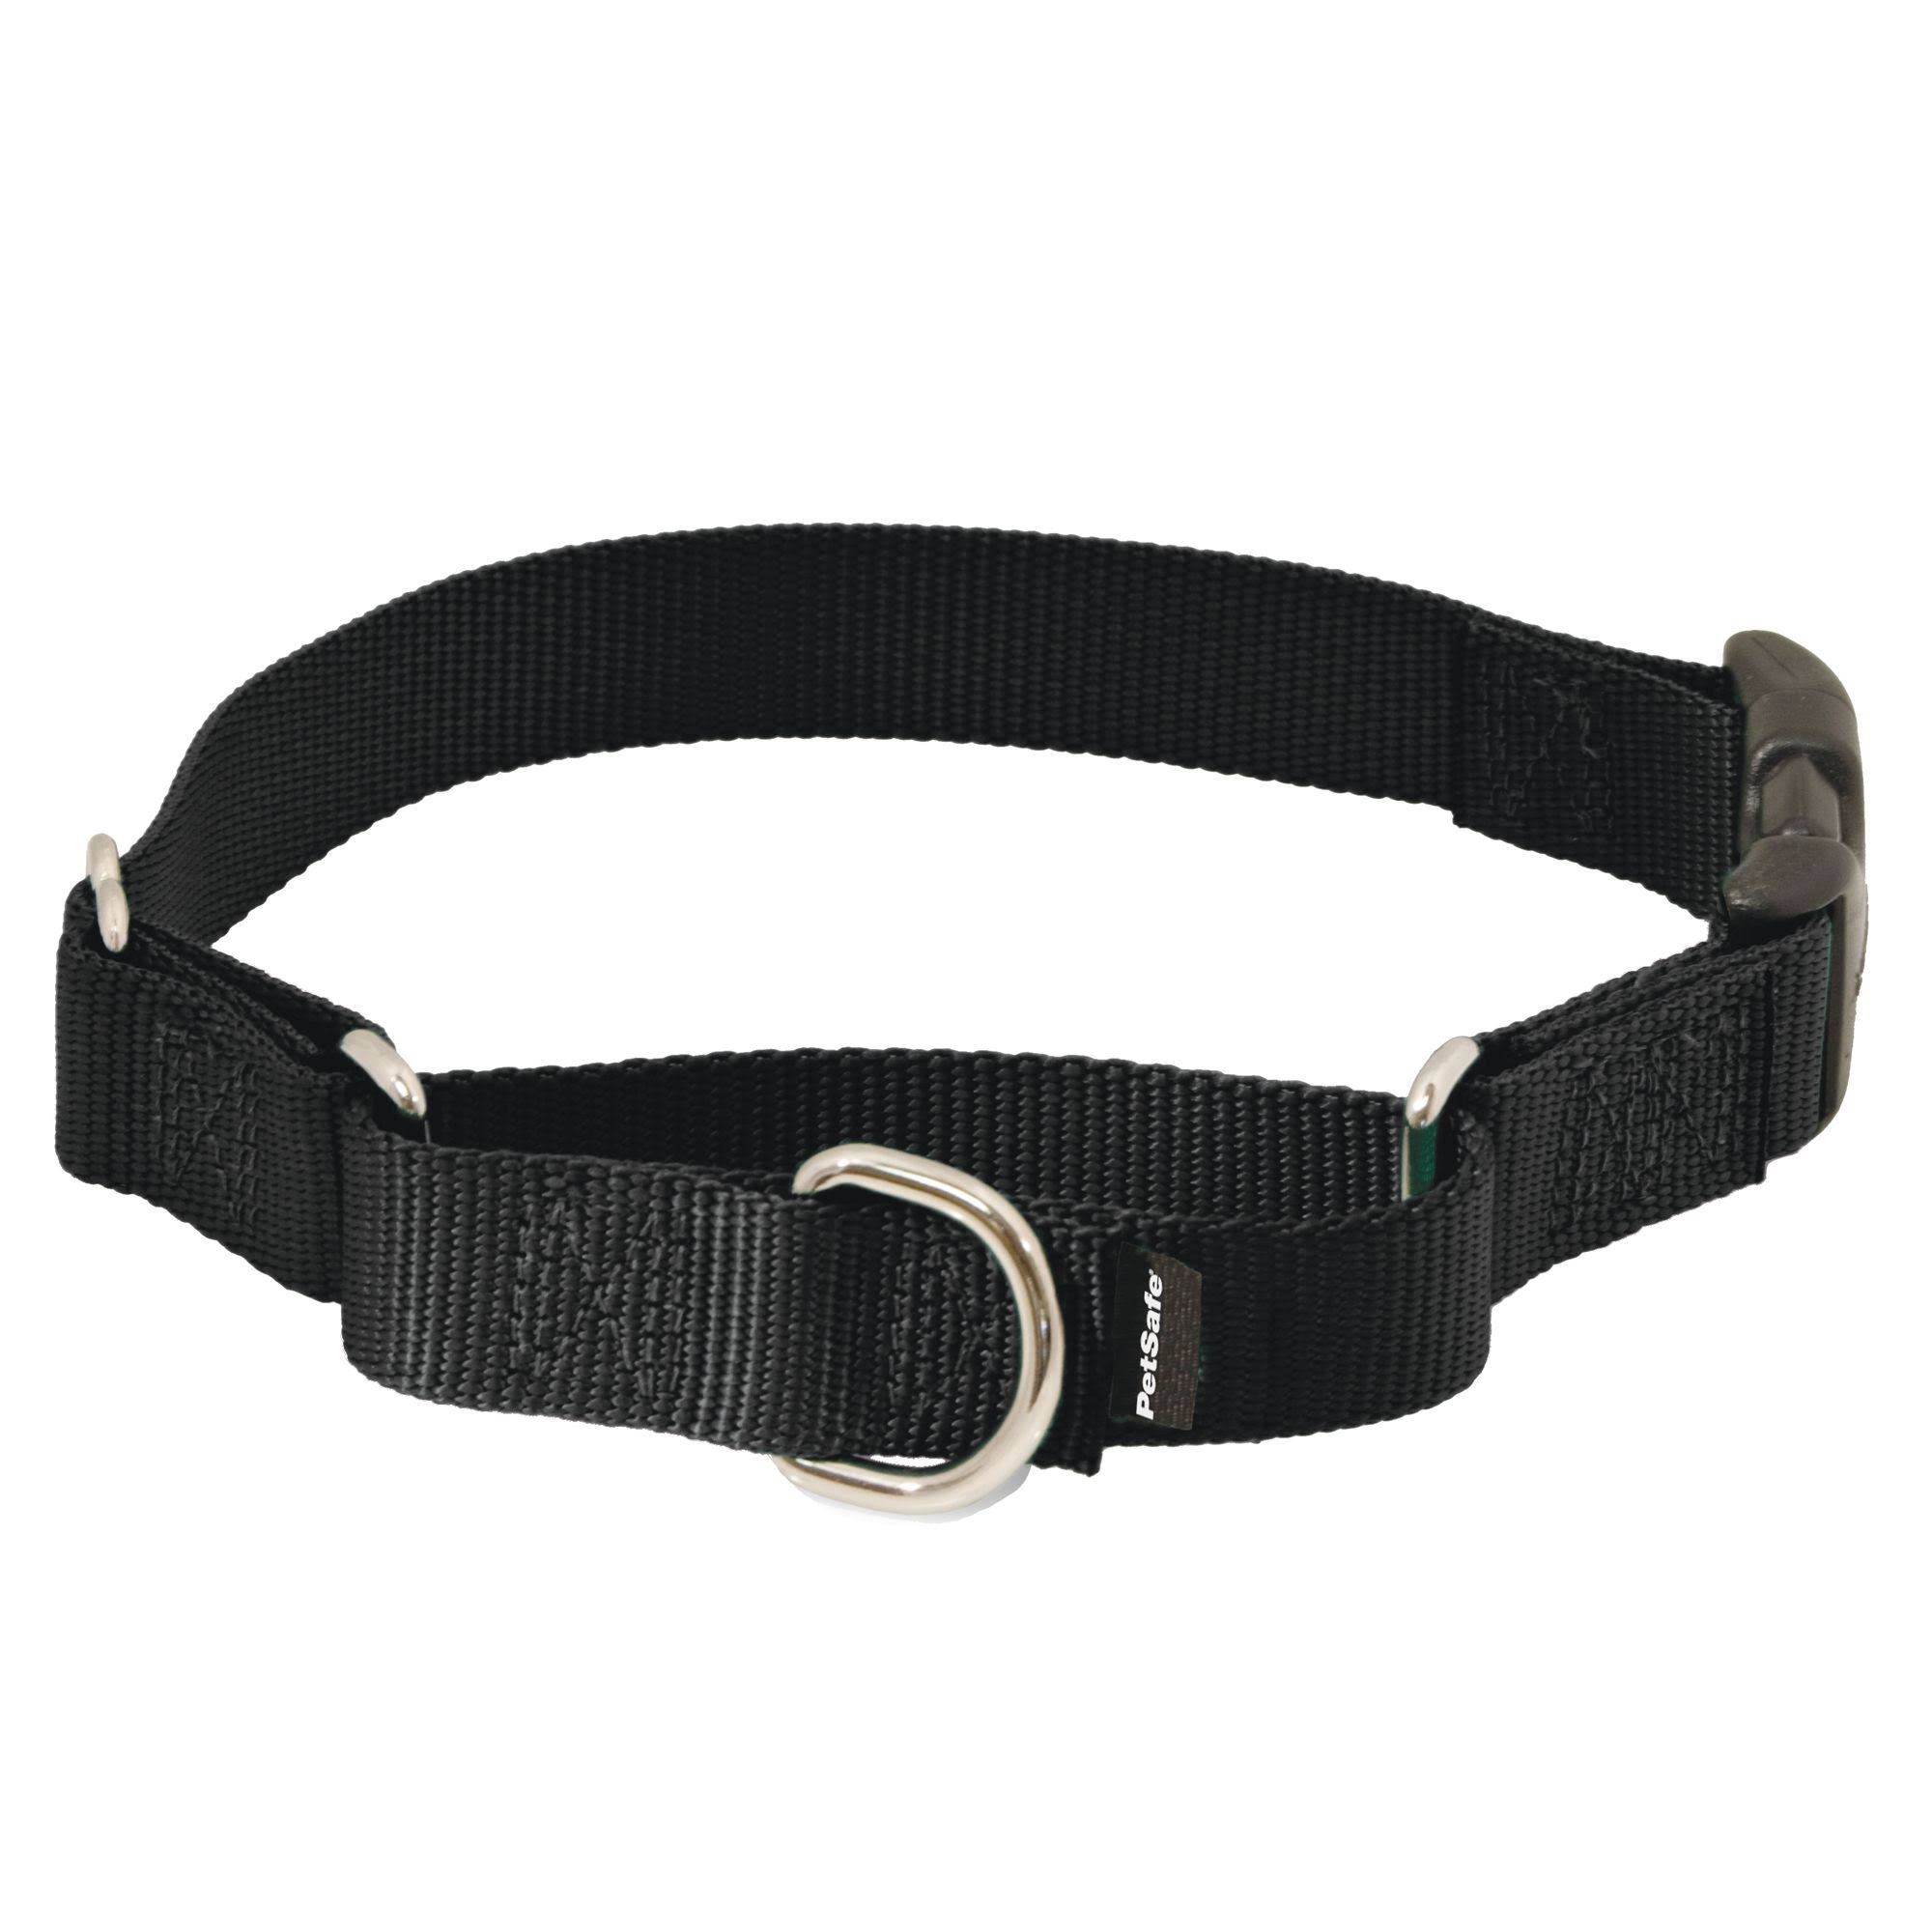 PetSafe Martingale Pet Collar with Quick Snap Buckle - 3/4", Small, Black